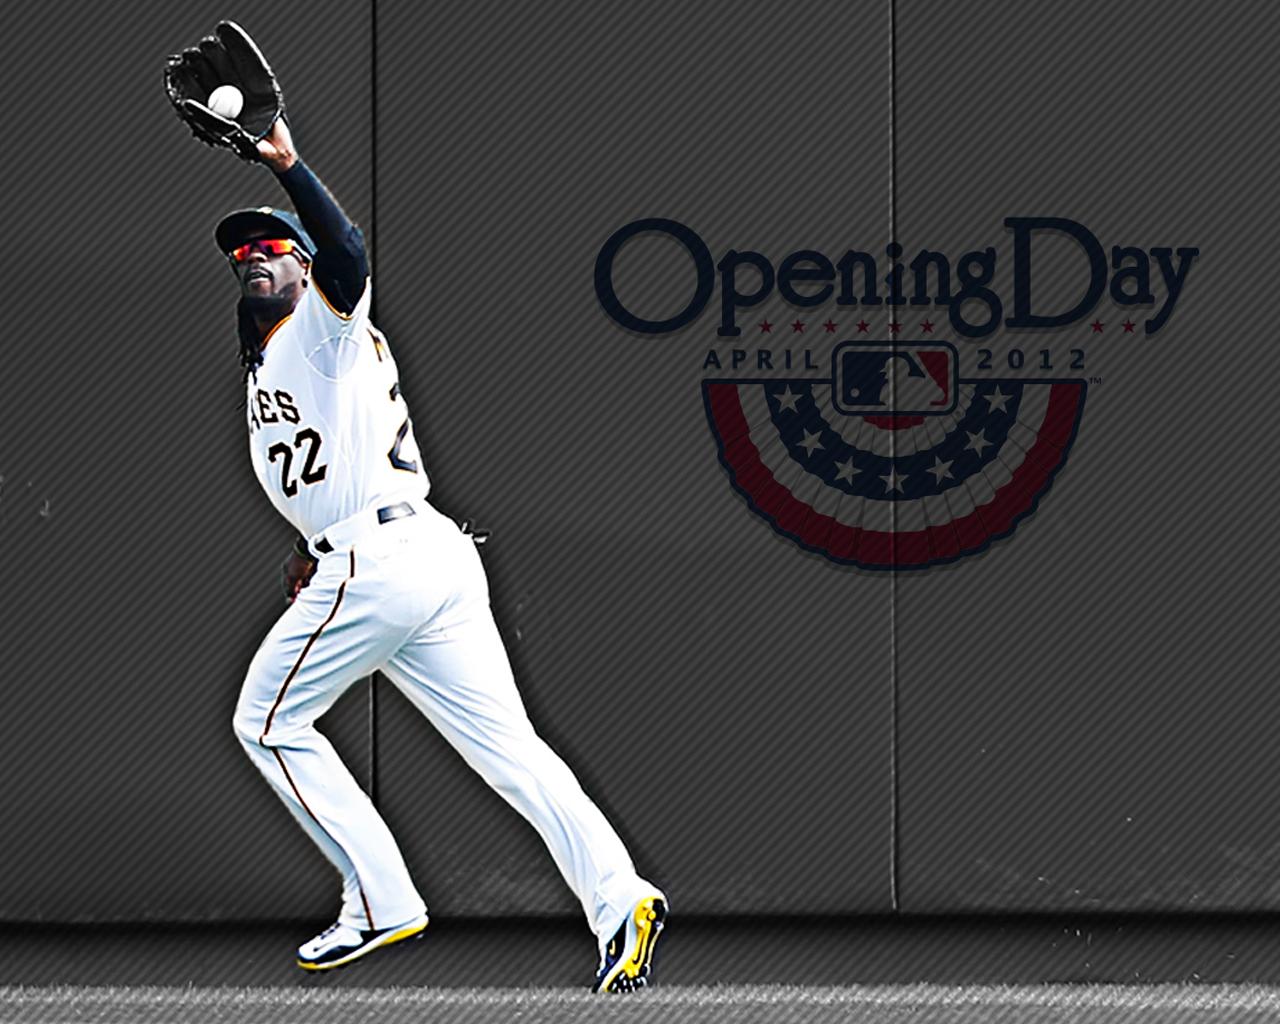 Free download Andrew McCutchen Opening Day Wallpaper